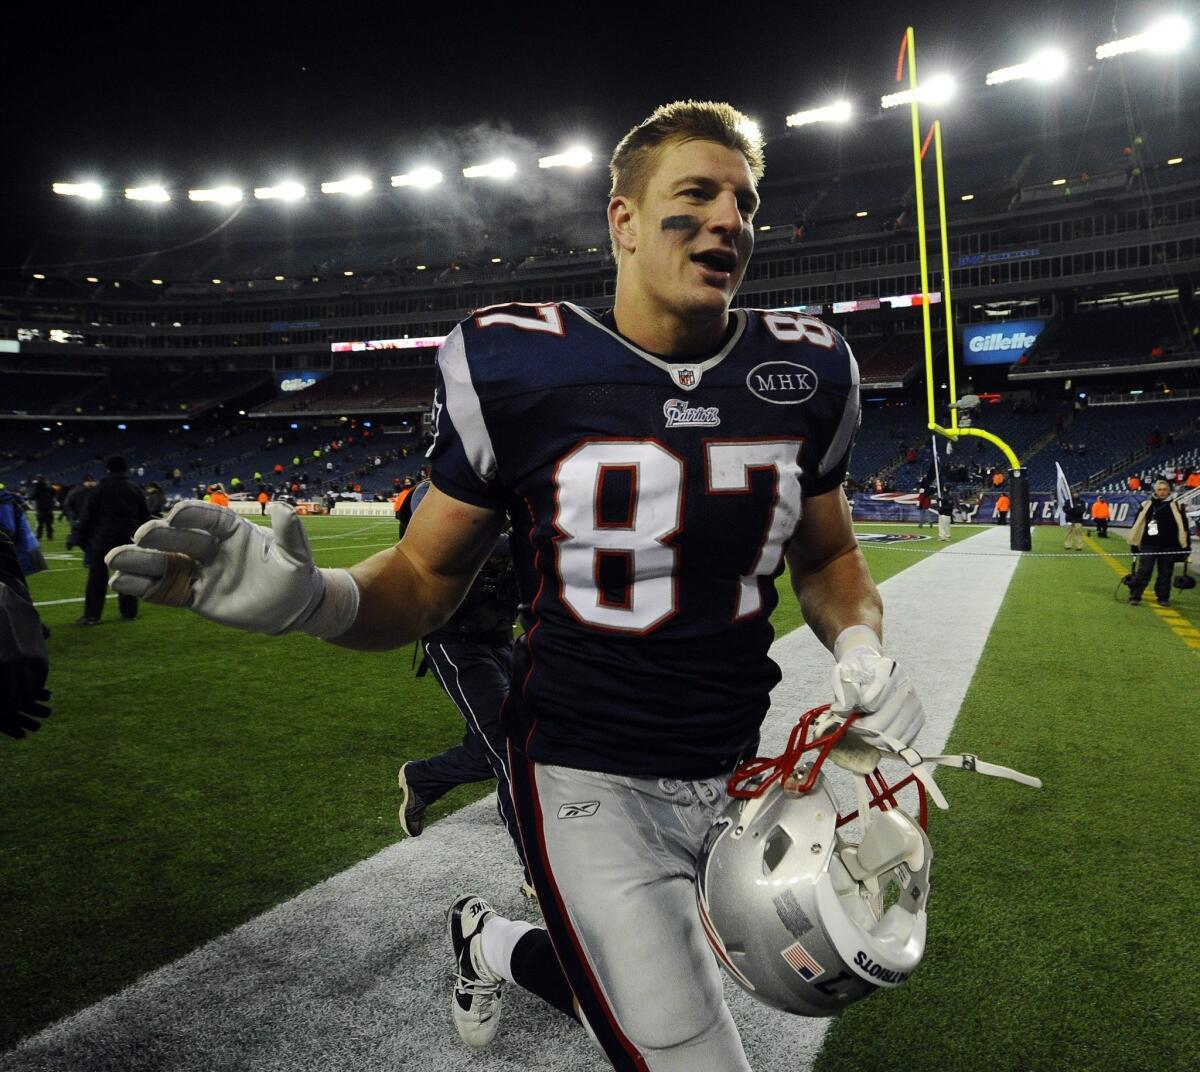 New England tight end Rob Gronkowski is expected to have back surgery on a herniated disk next month.